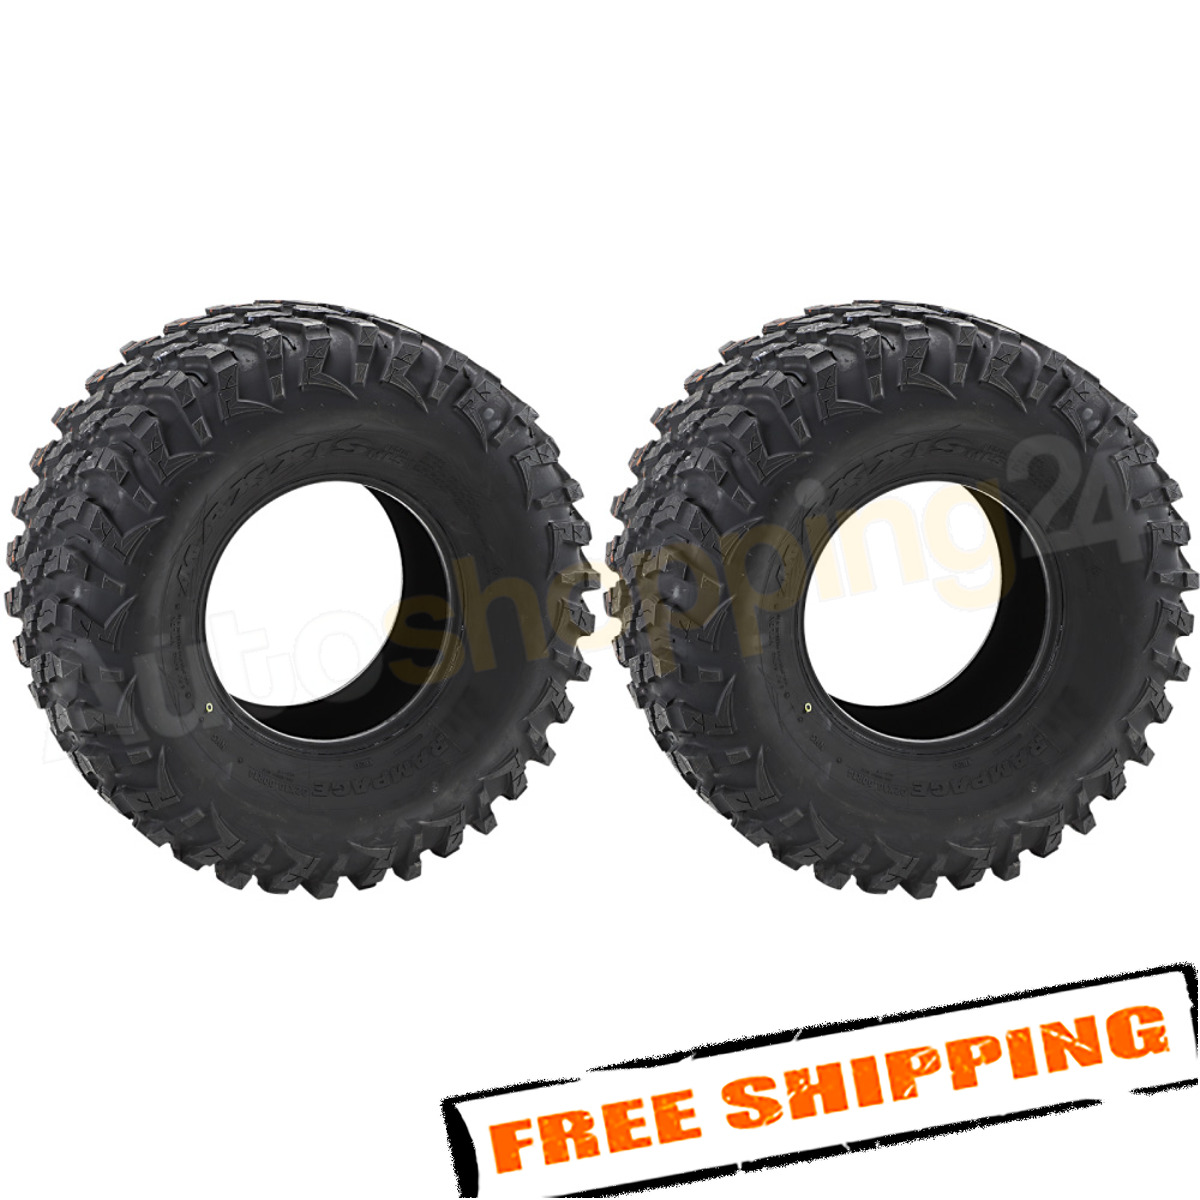 Maxxis TM00102900 Set of 2 30.00 x 10.00-14 Rear Rampage ML5 Tires